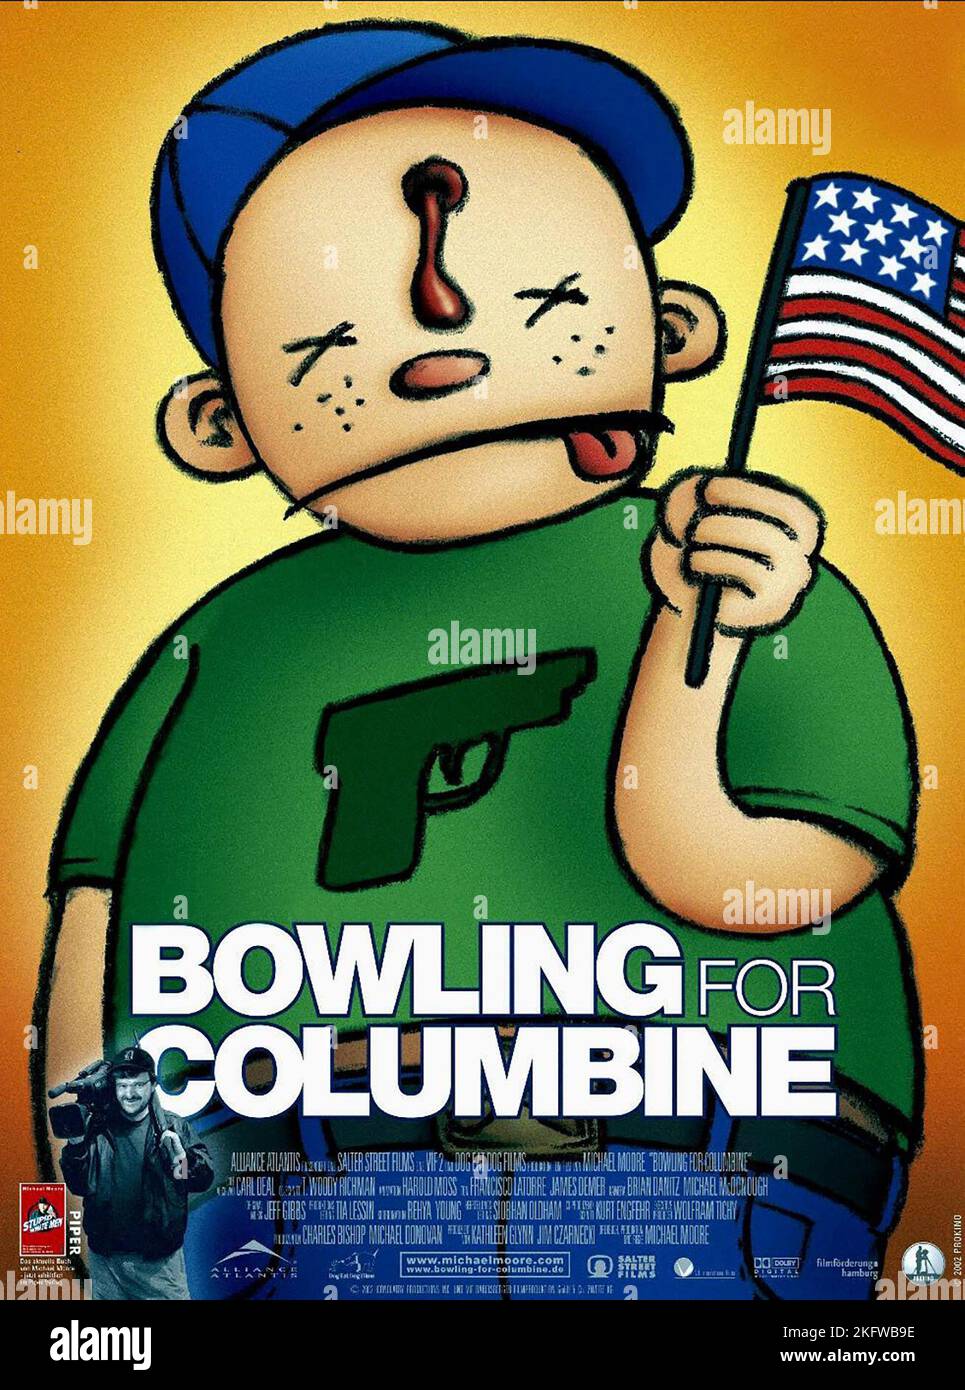 FILM POSTER, BOWLING FOR COLUMBINE, 2002 Stock Photo - Alamy